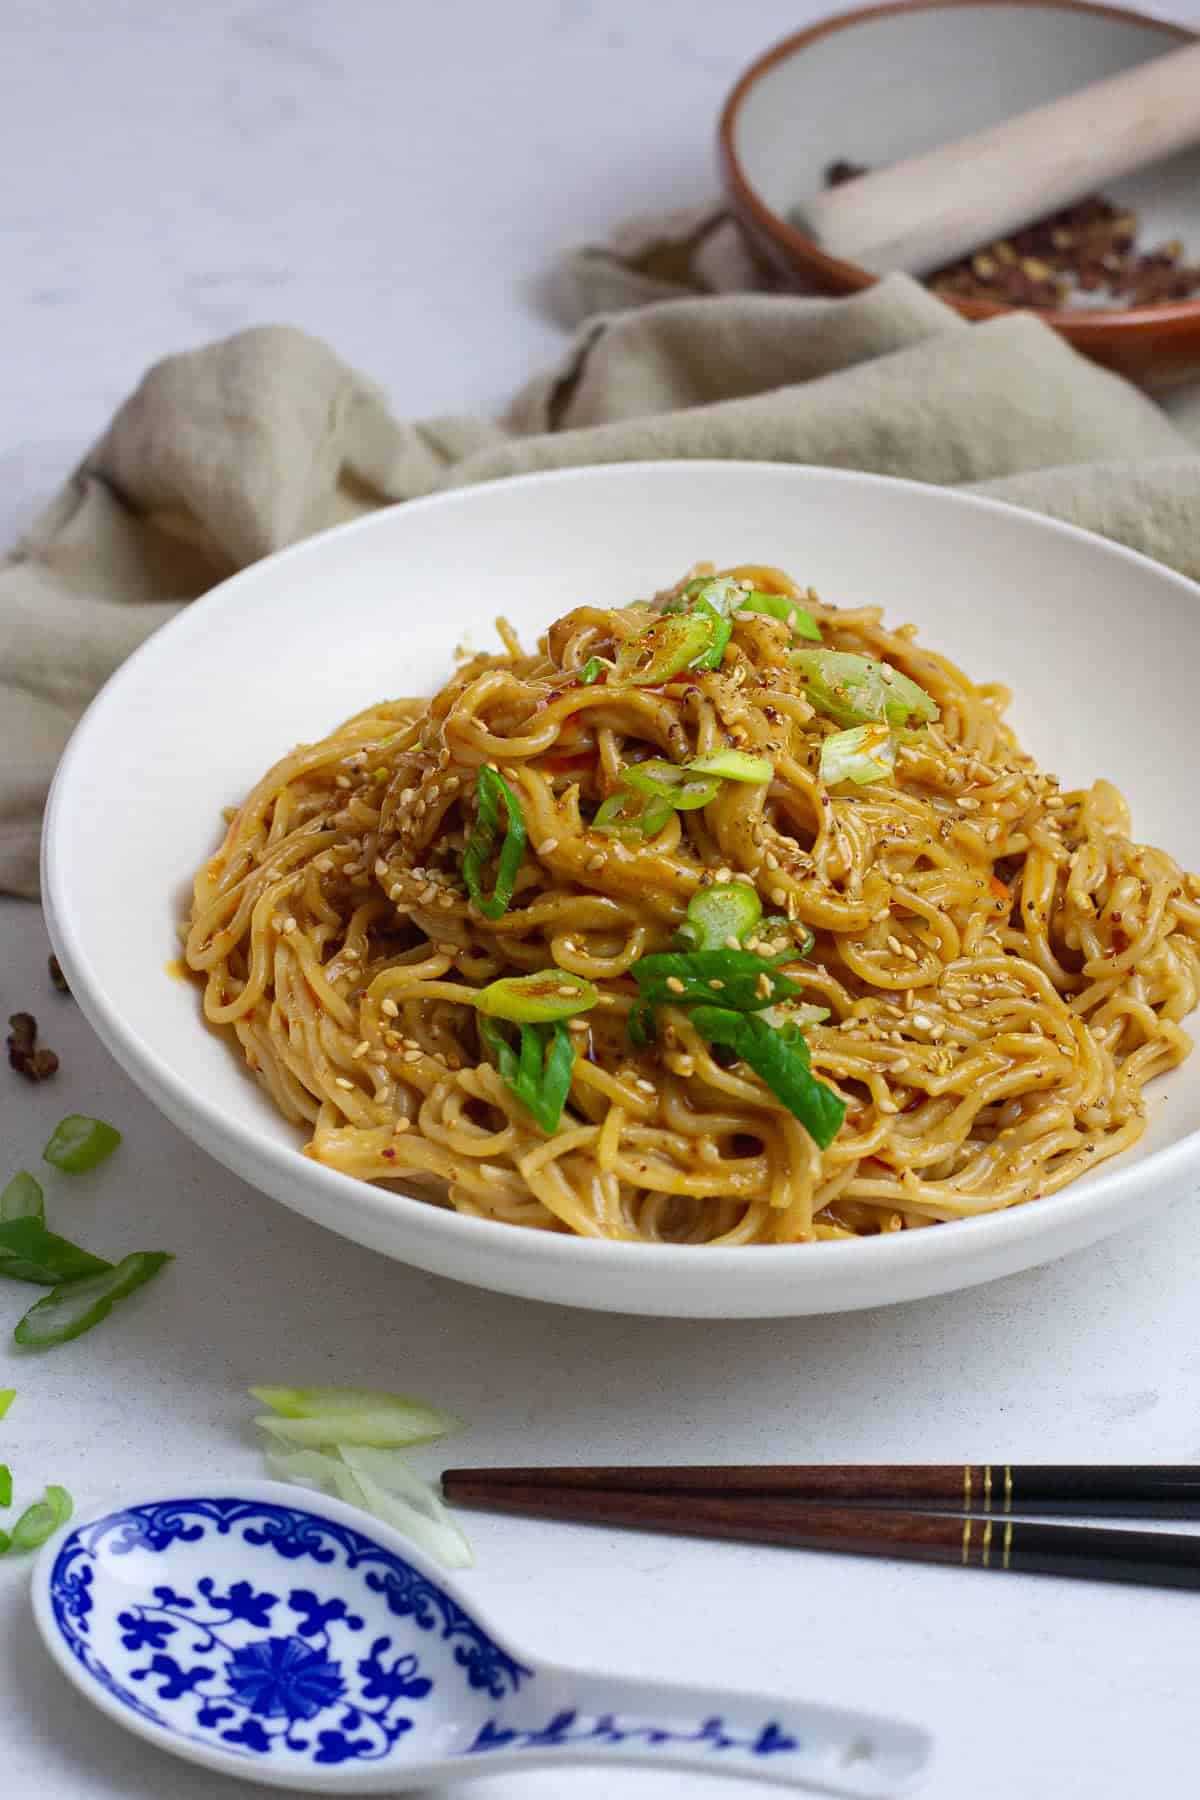 A bowl of noodles with sesame seeds and green onions.